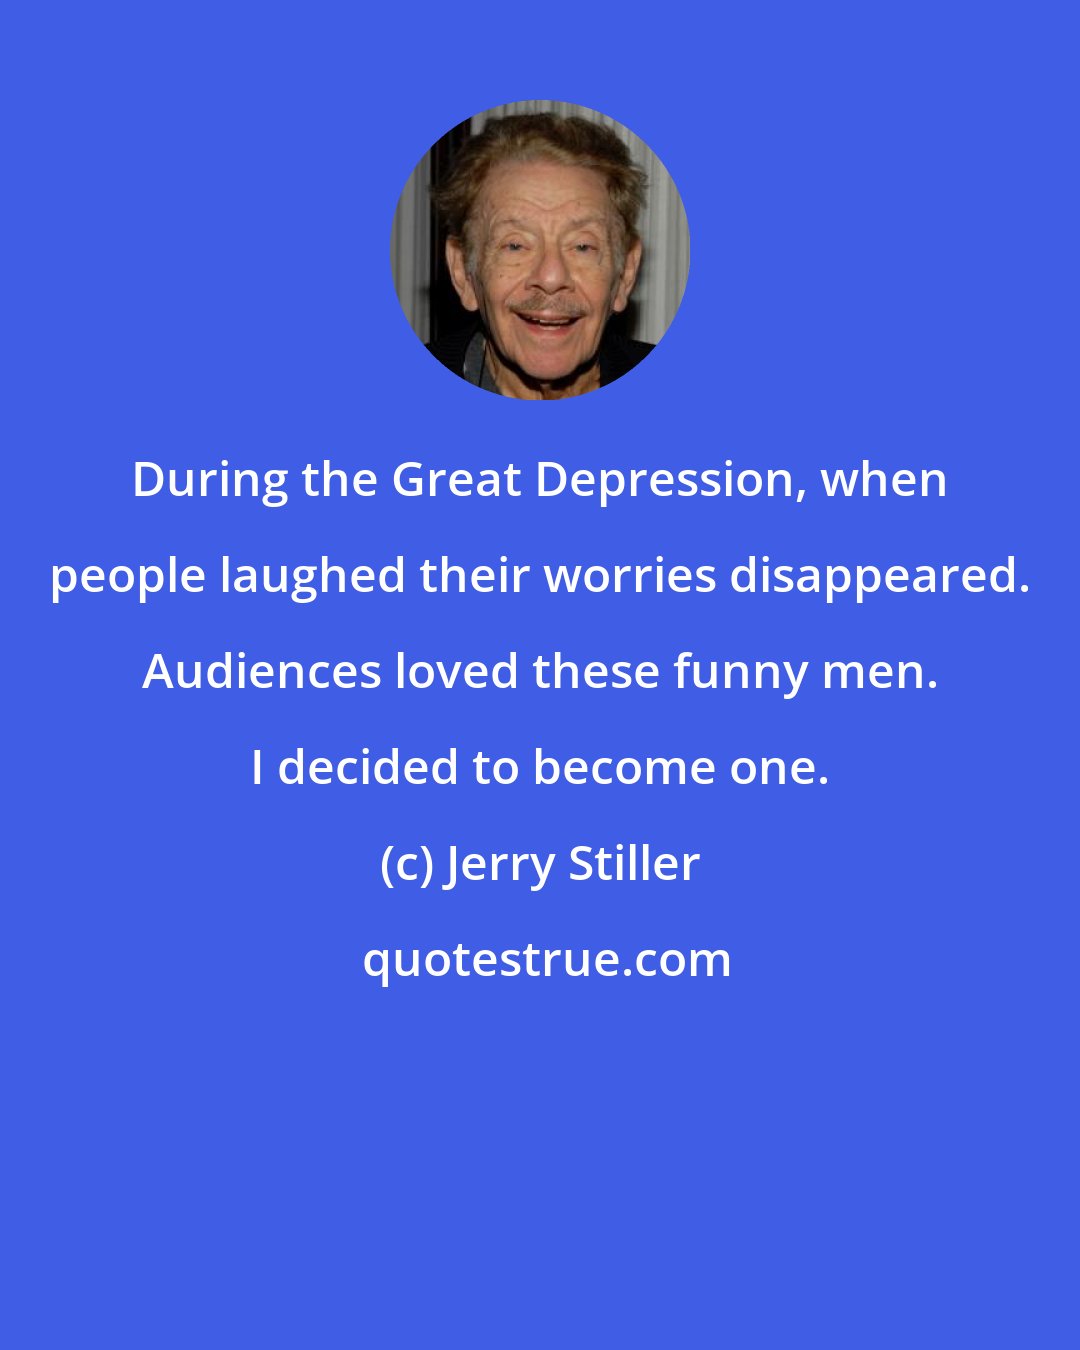 Jerry Stiller: During the Great Depression, when people laughed their worries disappeared. Audiences loved these funny men. I decided to become one.